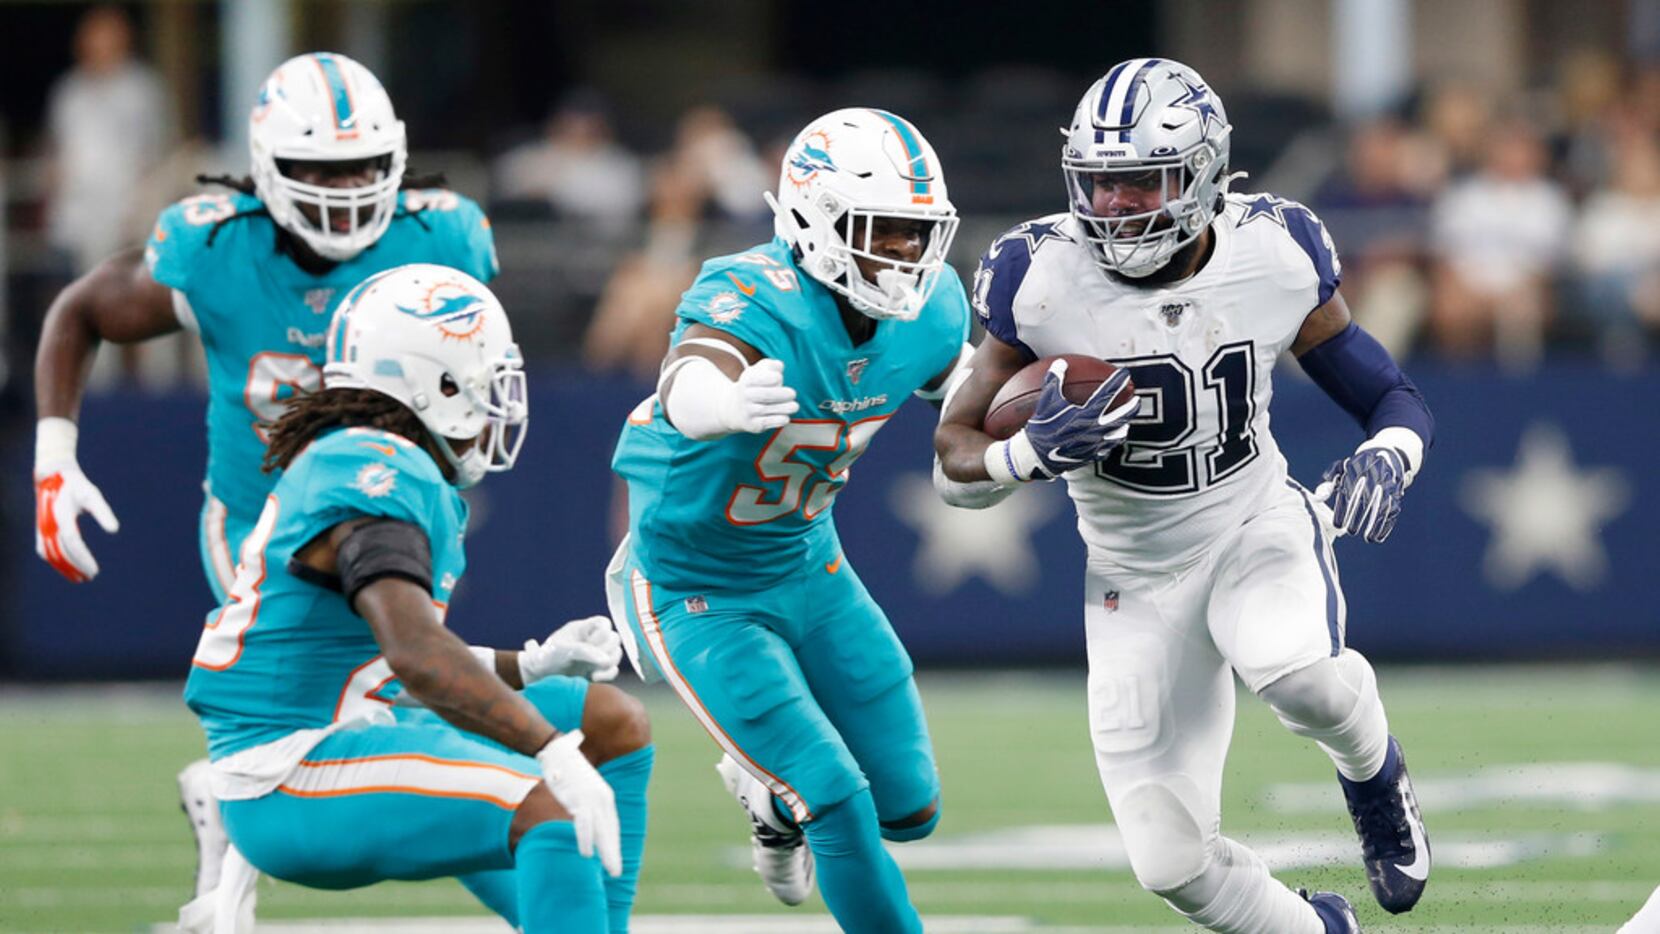 Grading the Cowboys: Dallas excels in run game on offense and